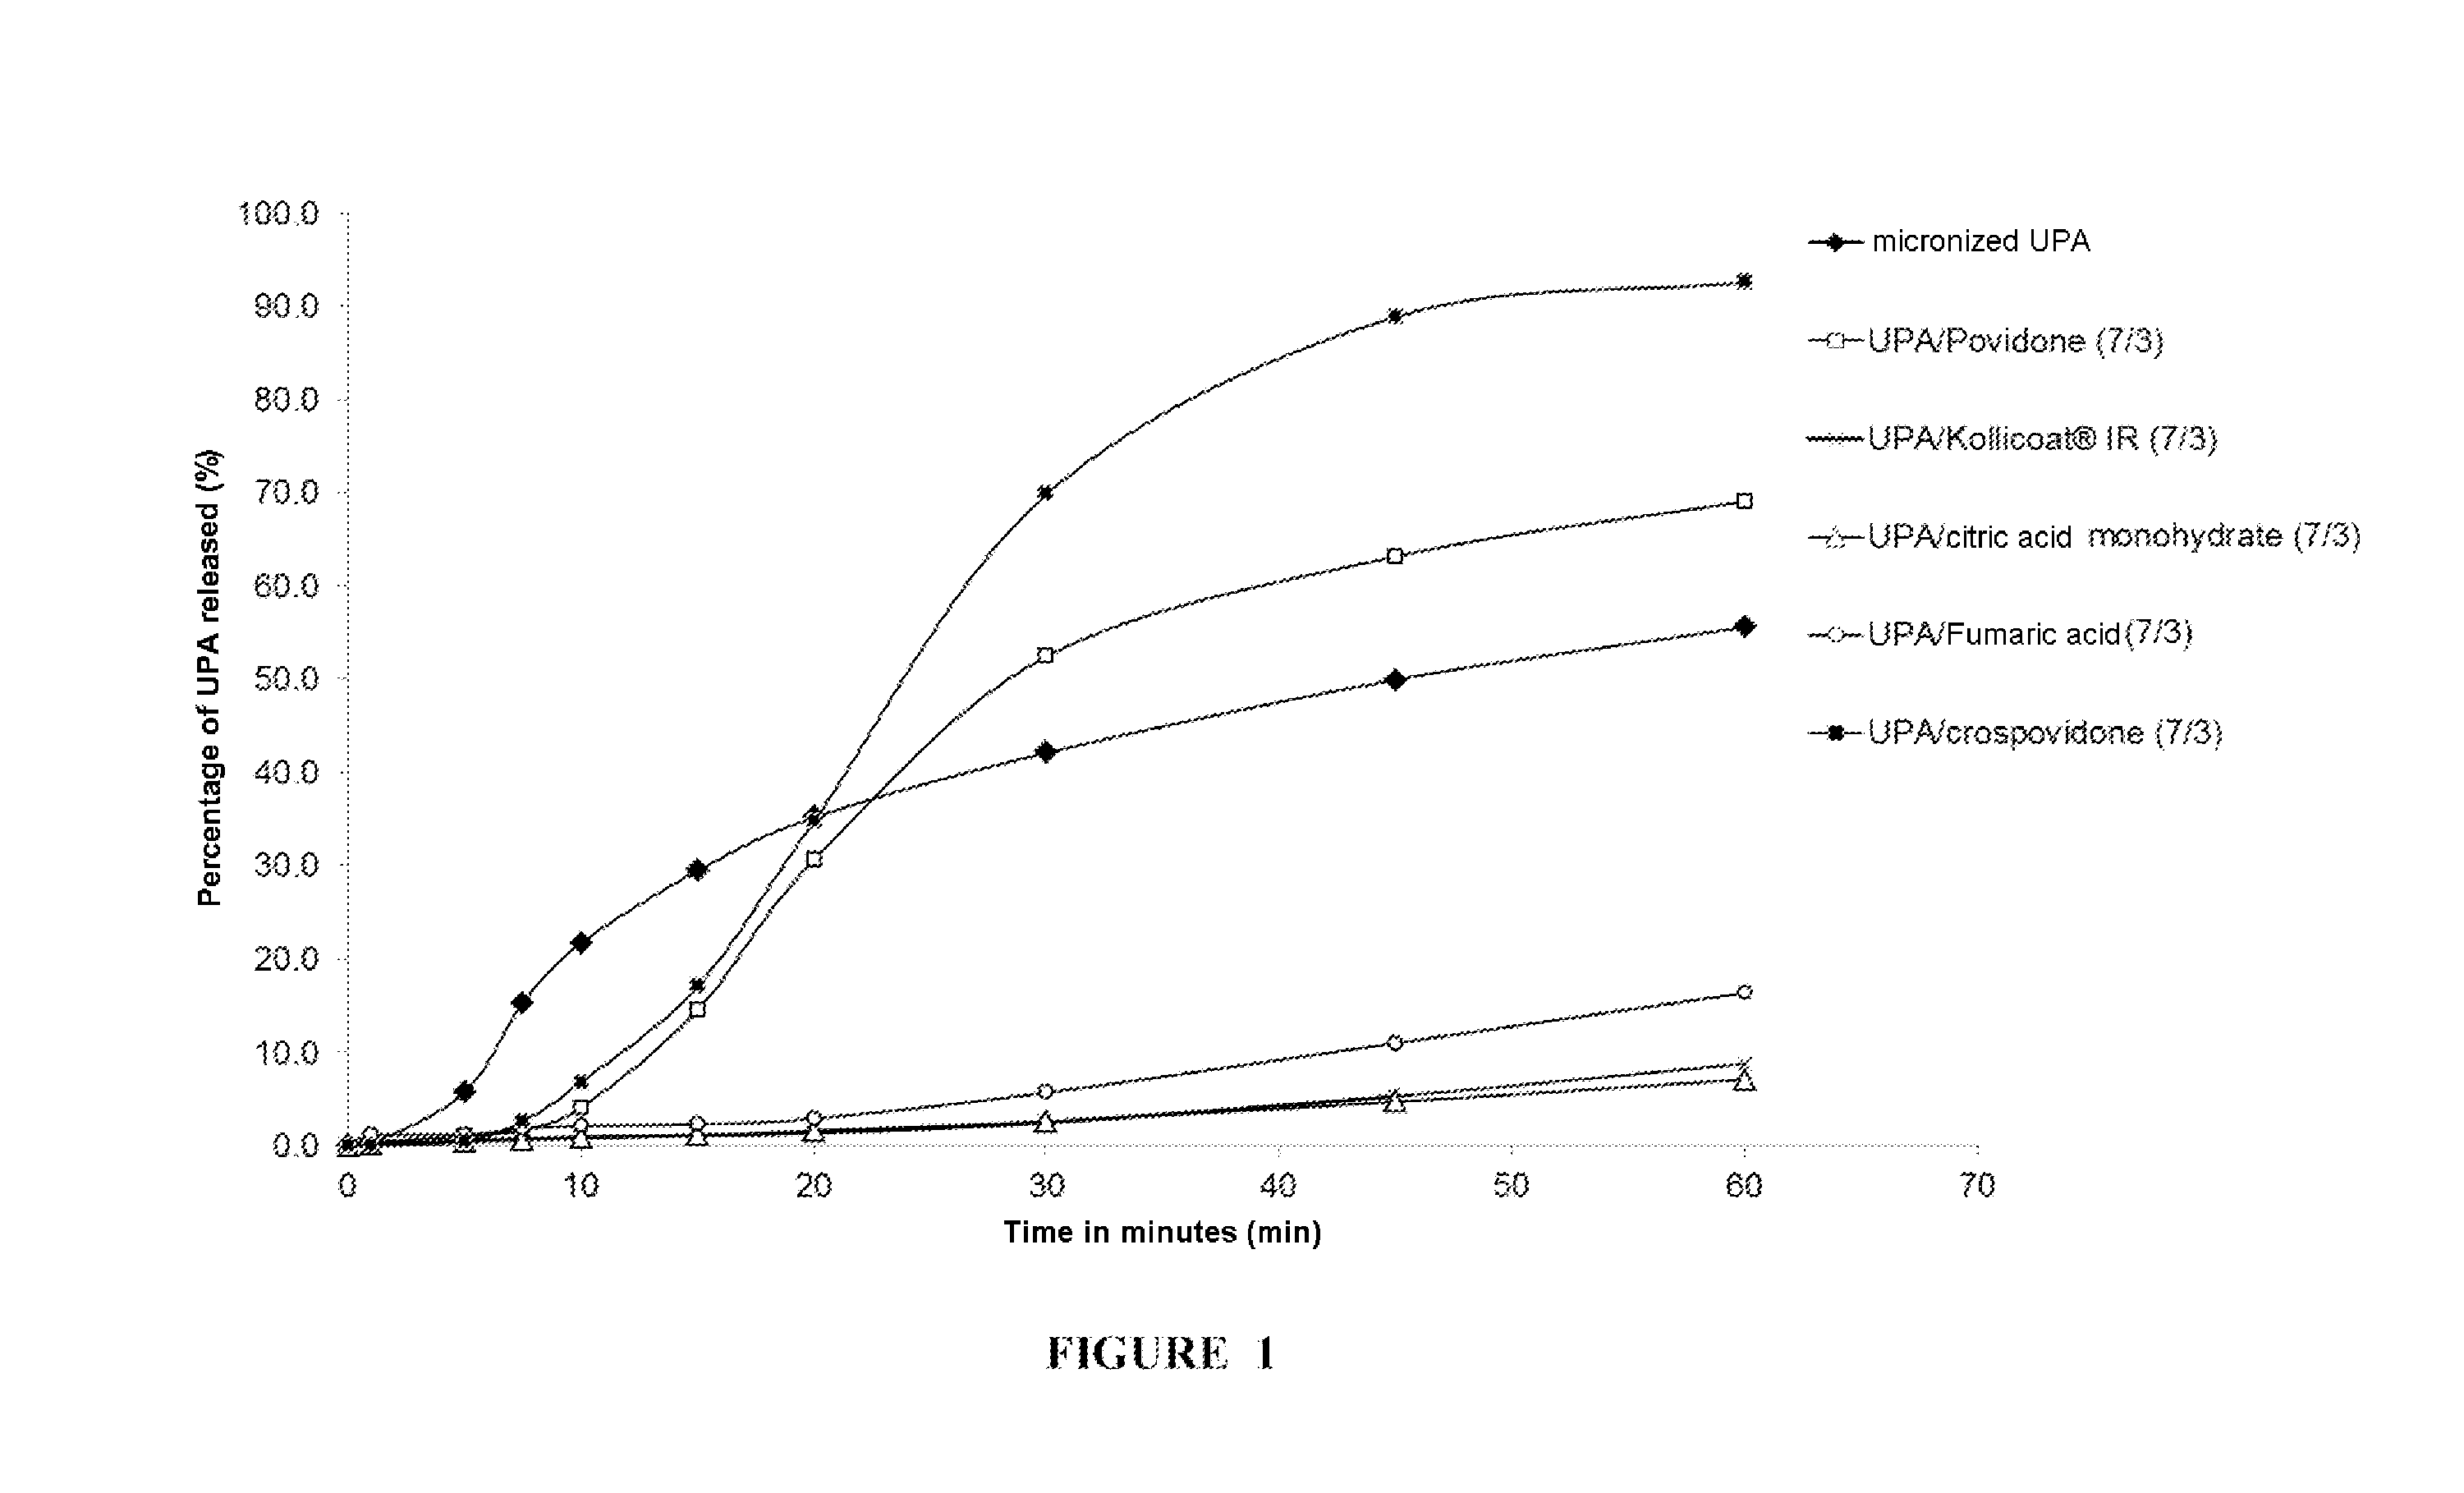 Co-micronisation product comprising a selective progesterone-receptor modulator